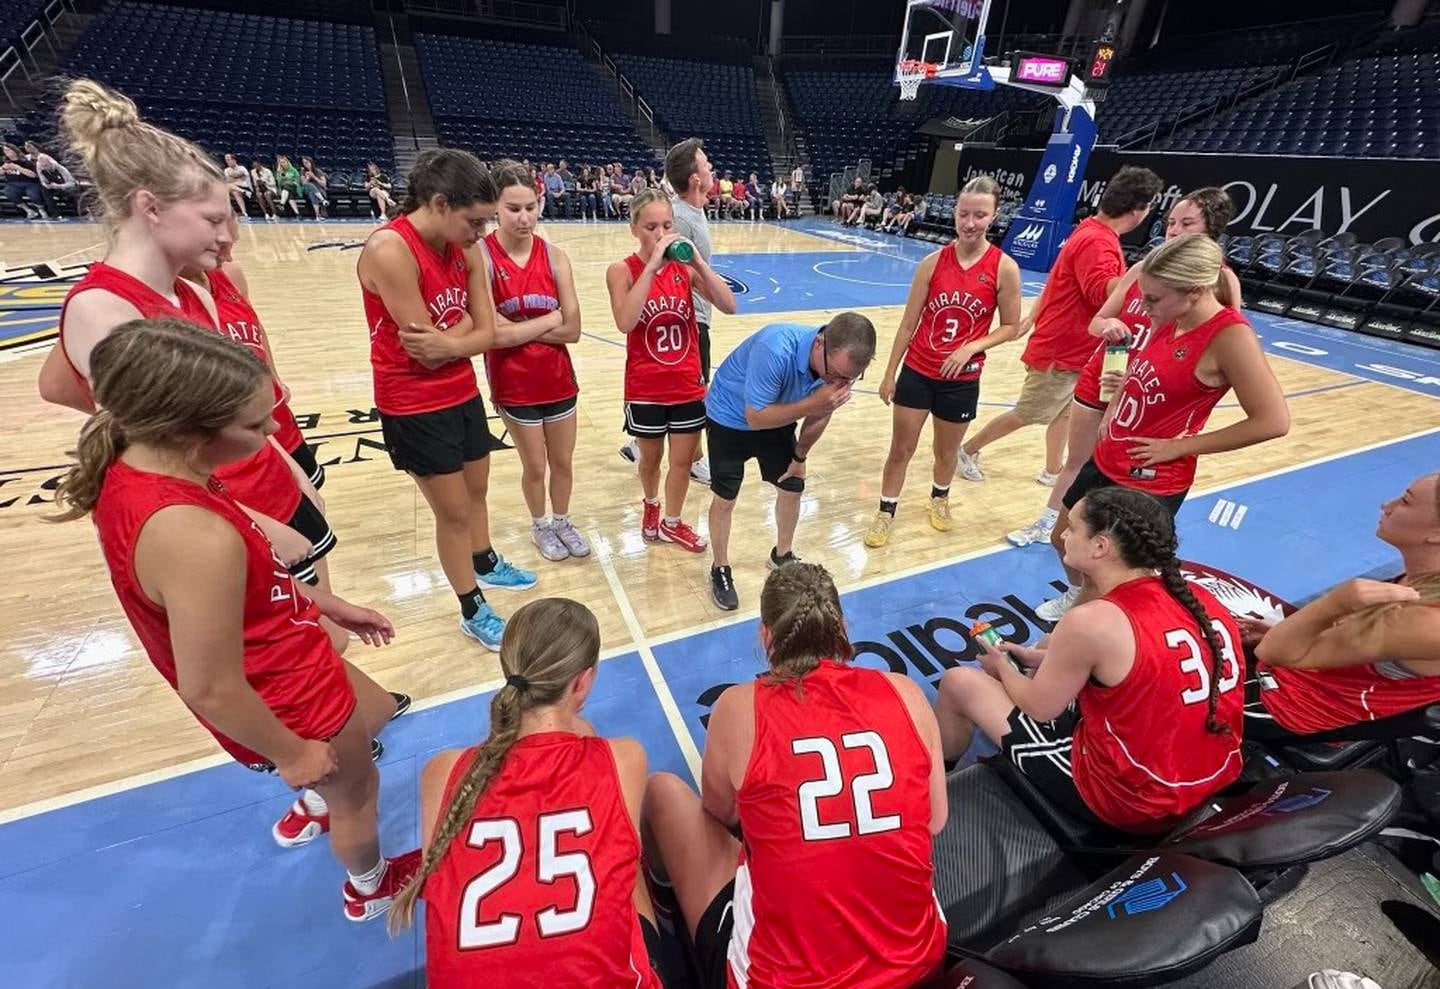 Ottawa girls basketball coach Brent Moore (center) talks things over with his Pirates squad during their summer scrimmage against Geneseo in early June at Wintrust Arena in Chicago, home of the WNBA's Chicago Sky.